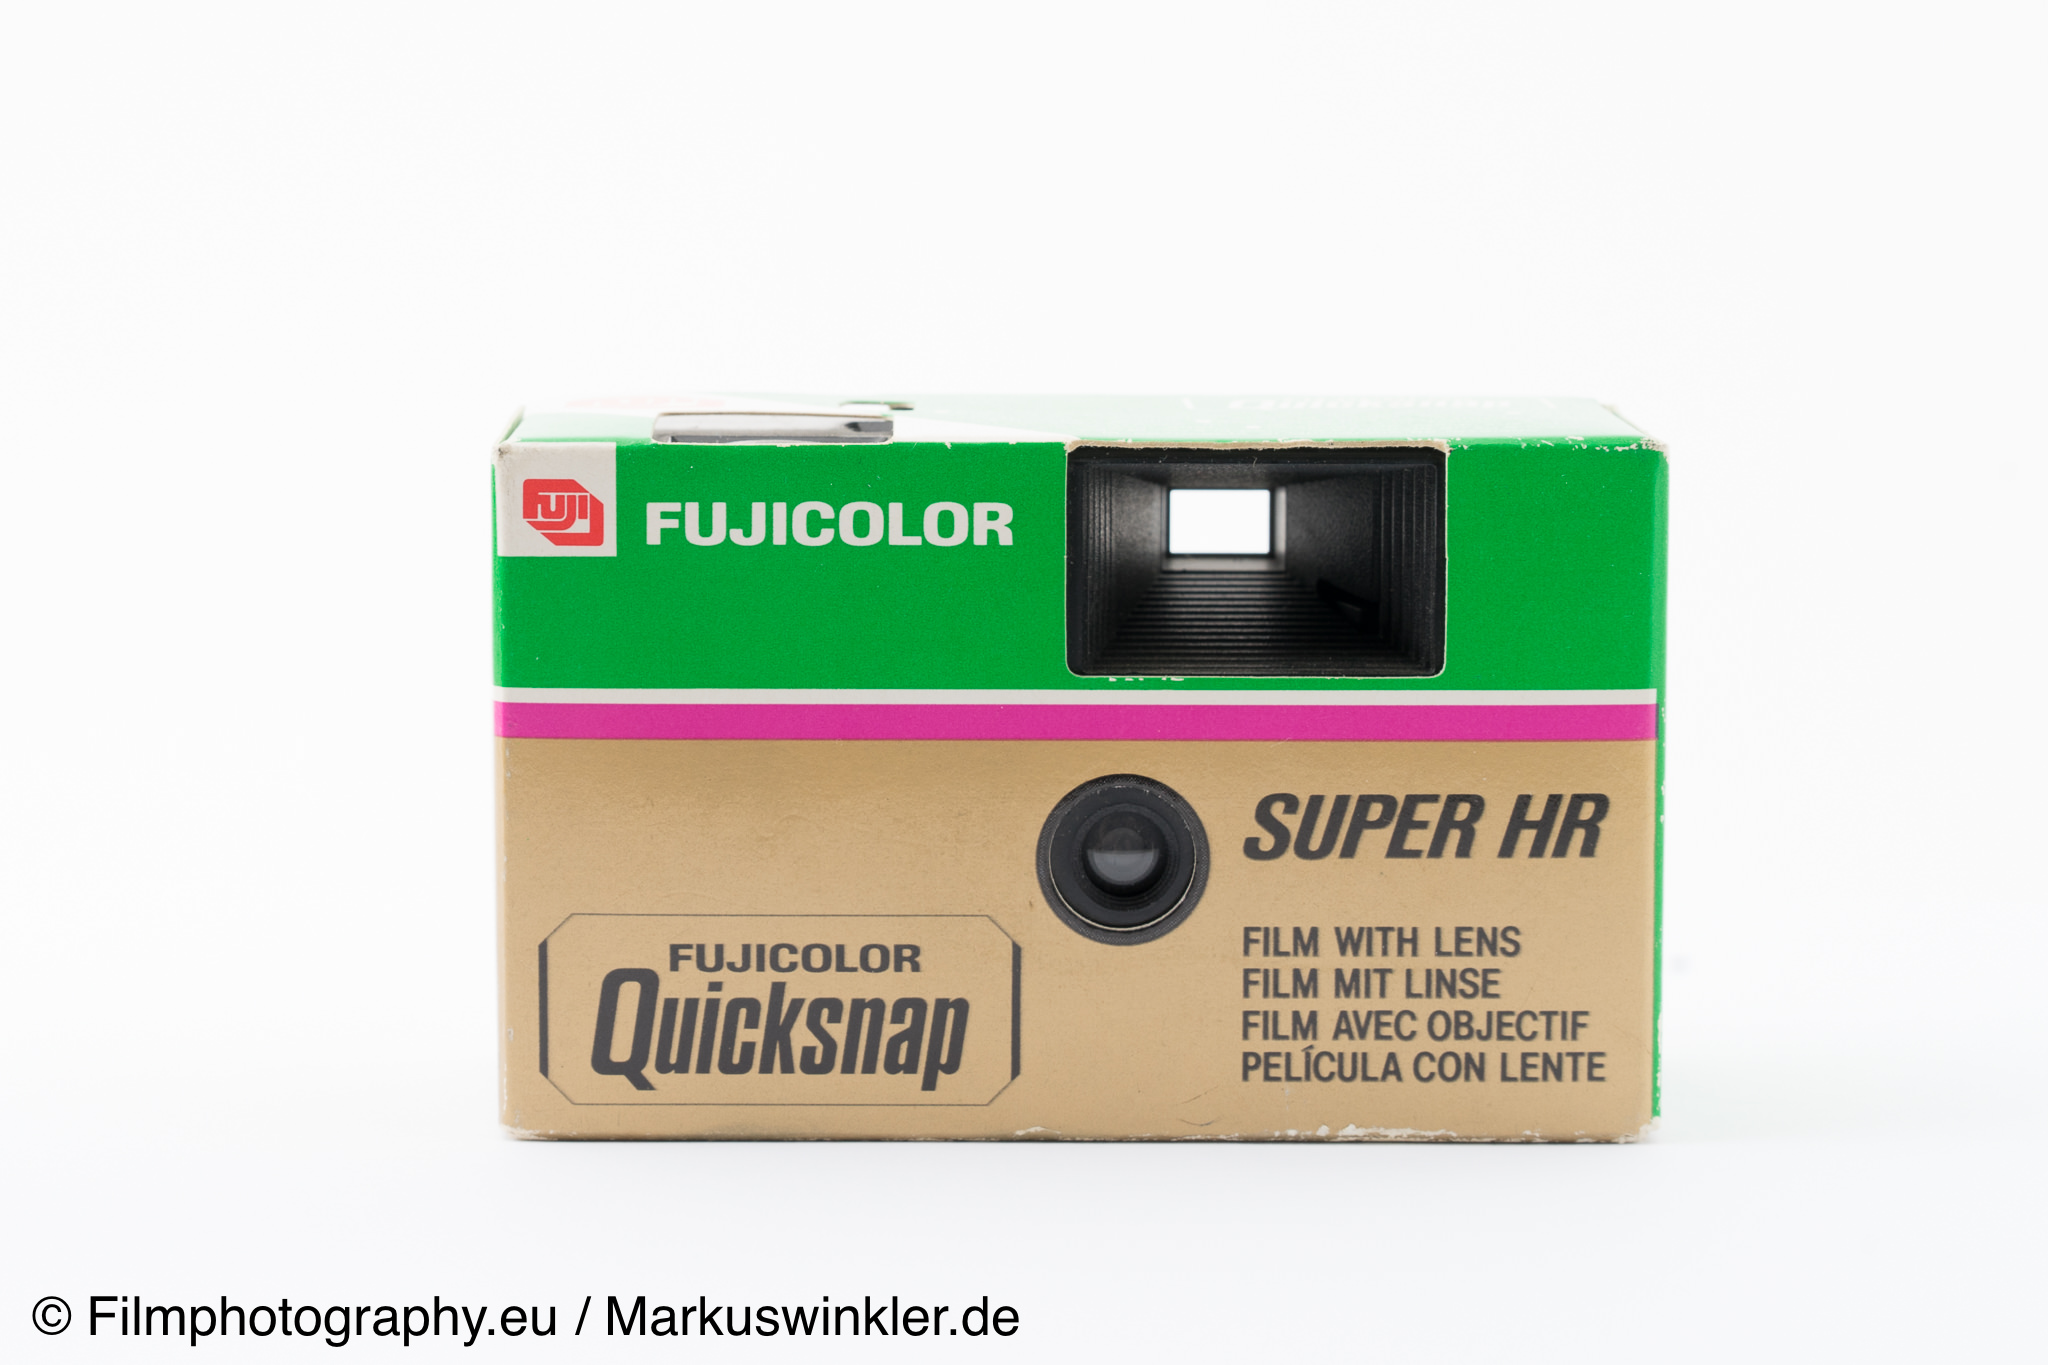 Fuji 35mm QuickSnap Single Use Camera, 400 ASA (FUJ7033661) Category:  Single Use Cameras (Discontinued by Manufacturer), 10 Count